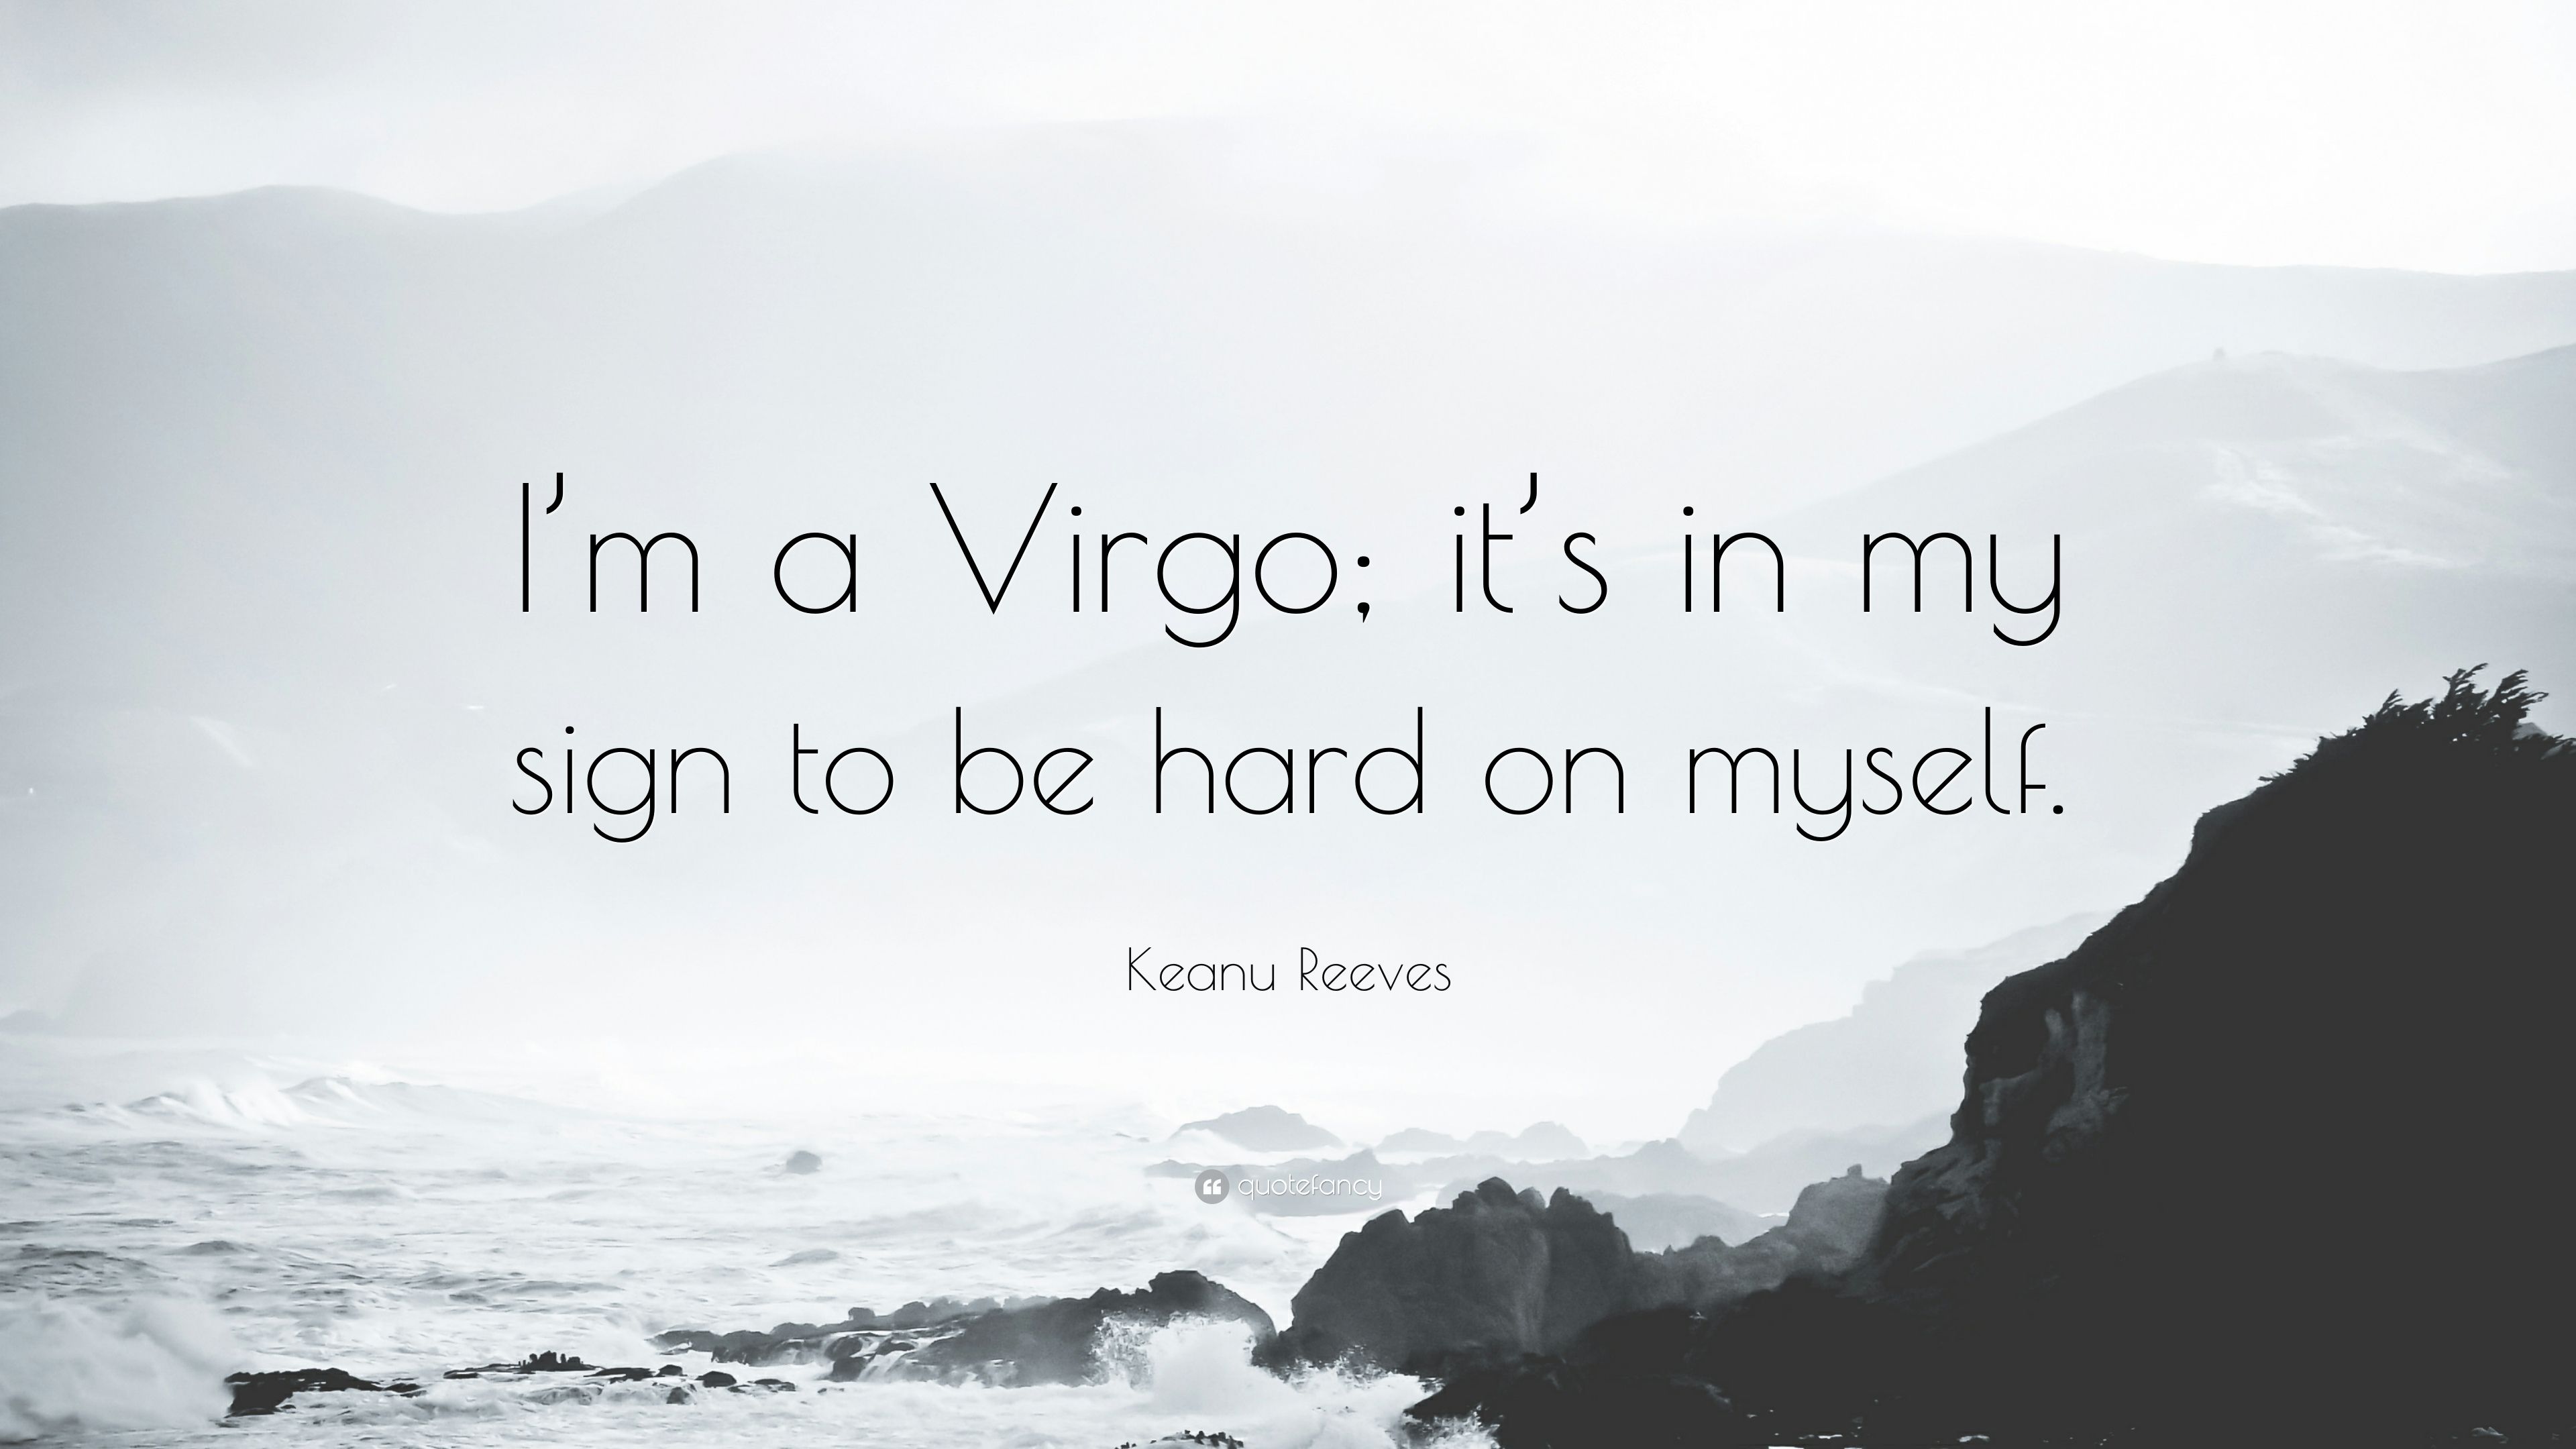 Keanu Reeves Quote: “I'm a Virgo; it's in my sign to be hard on myself.” (7 wallpaper)